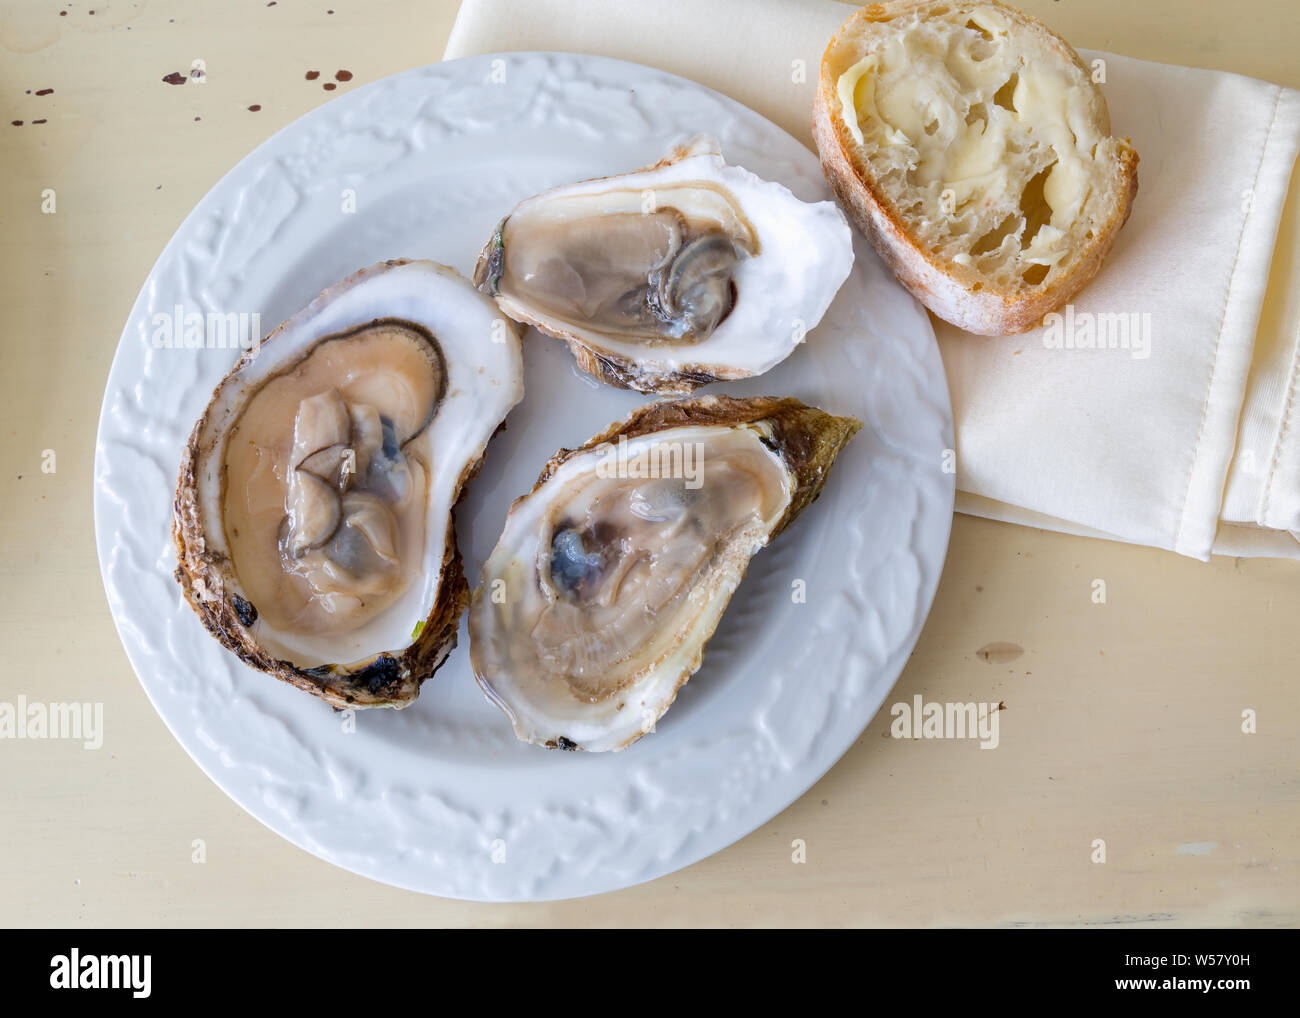 Opened raw oysters on a plate. Stock Photo